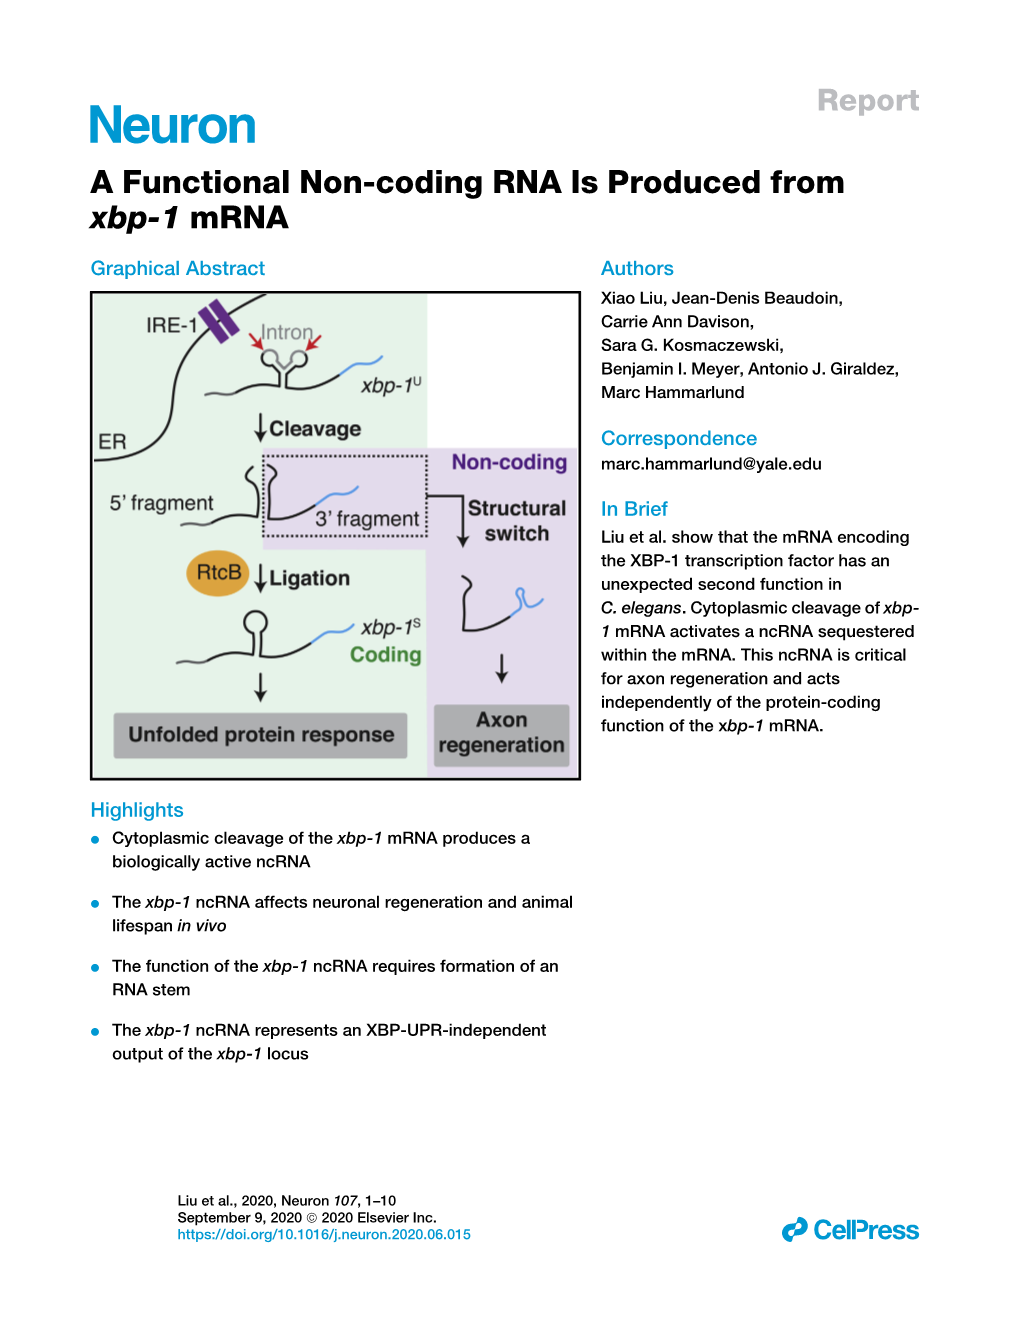 A Functional Non-Coding RNA Is Produced from Xbp-1 Mrna